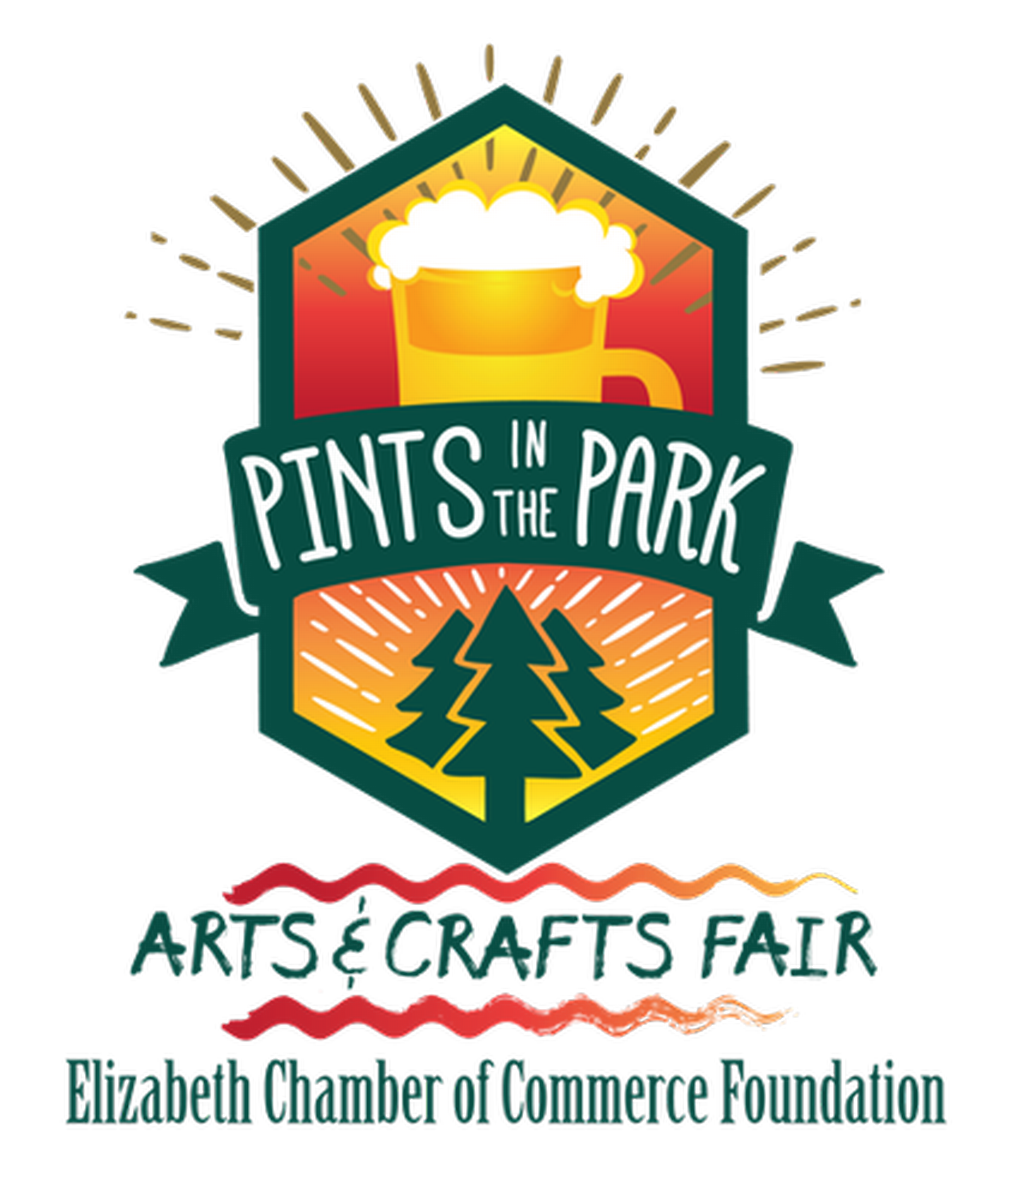 2023 Arts & Crafts Fair and Pints in the Park FUNDRAISER Sep 23, 2023